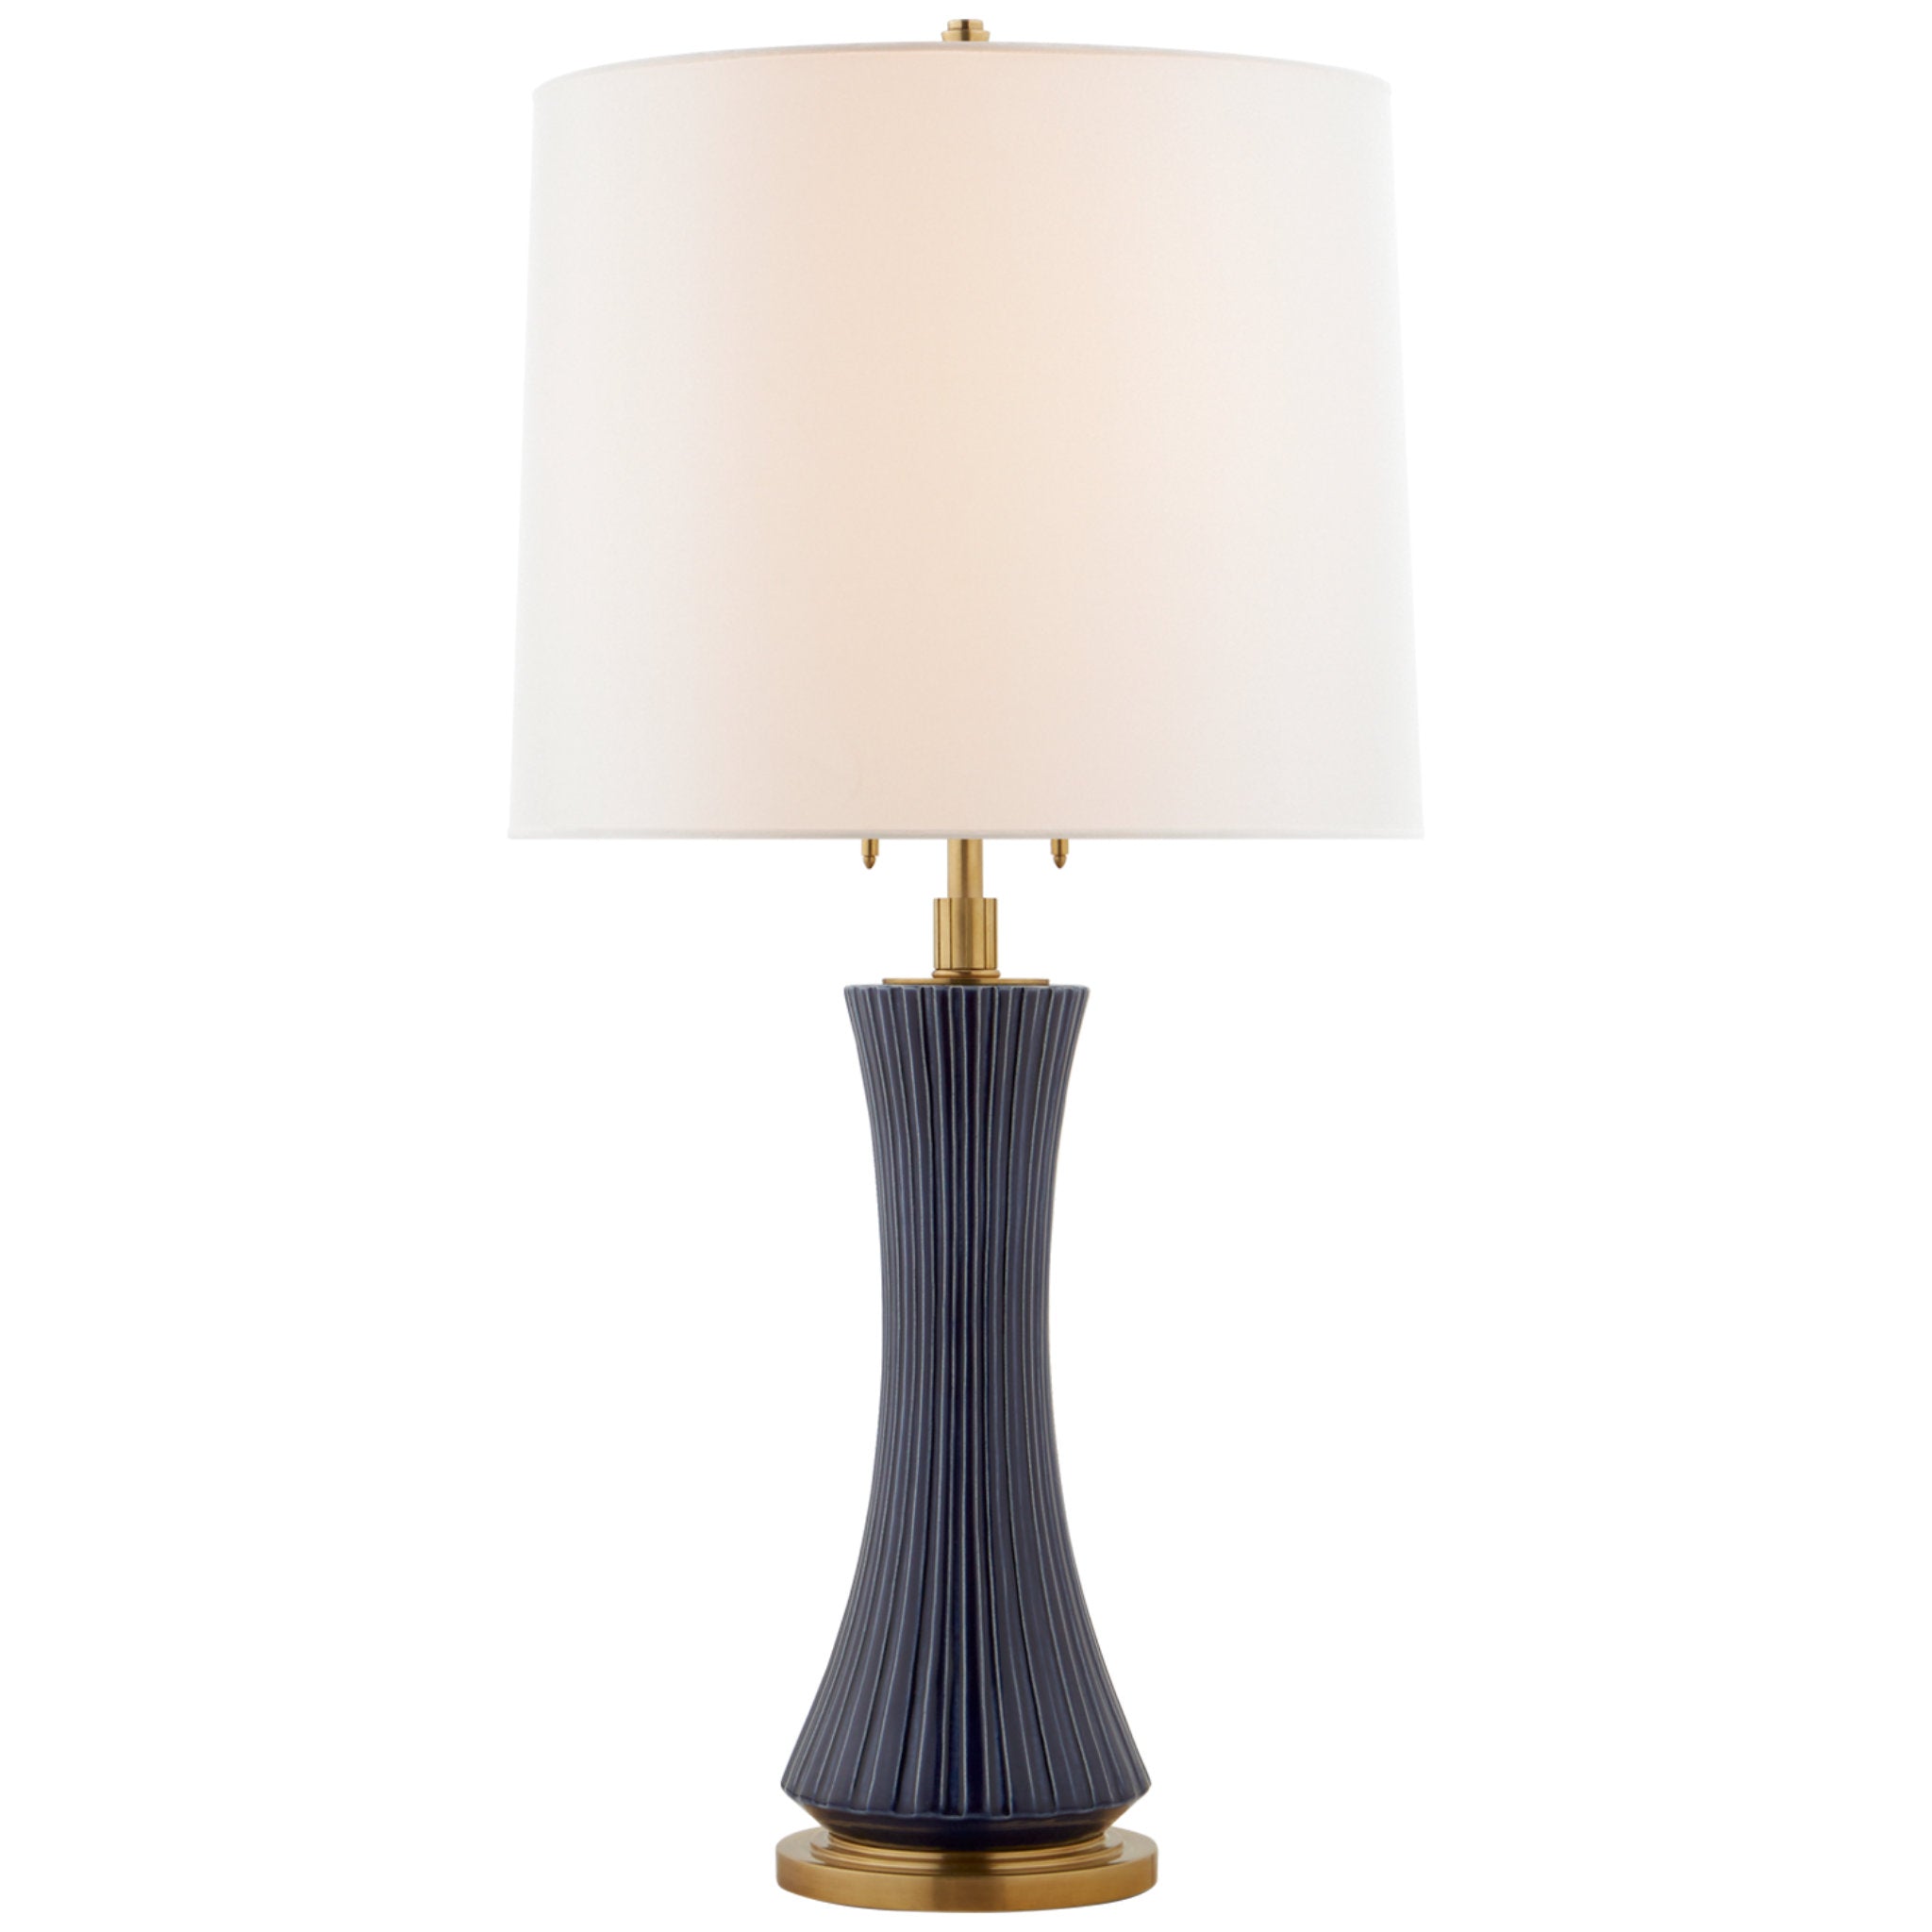 Thomas O'Brien Elena Large Table Lamp in Denim with Linen Shade